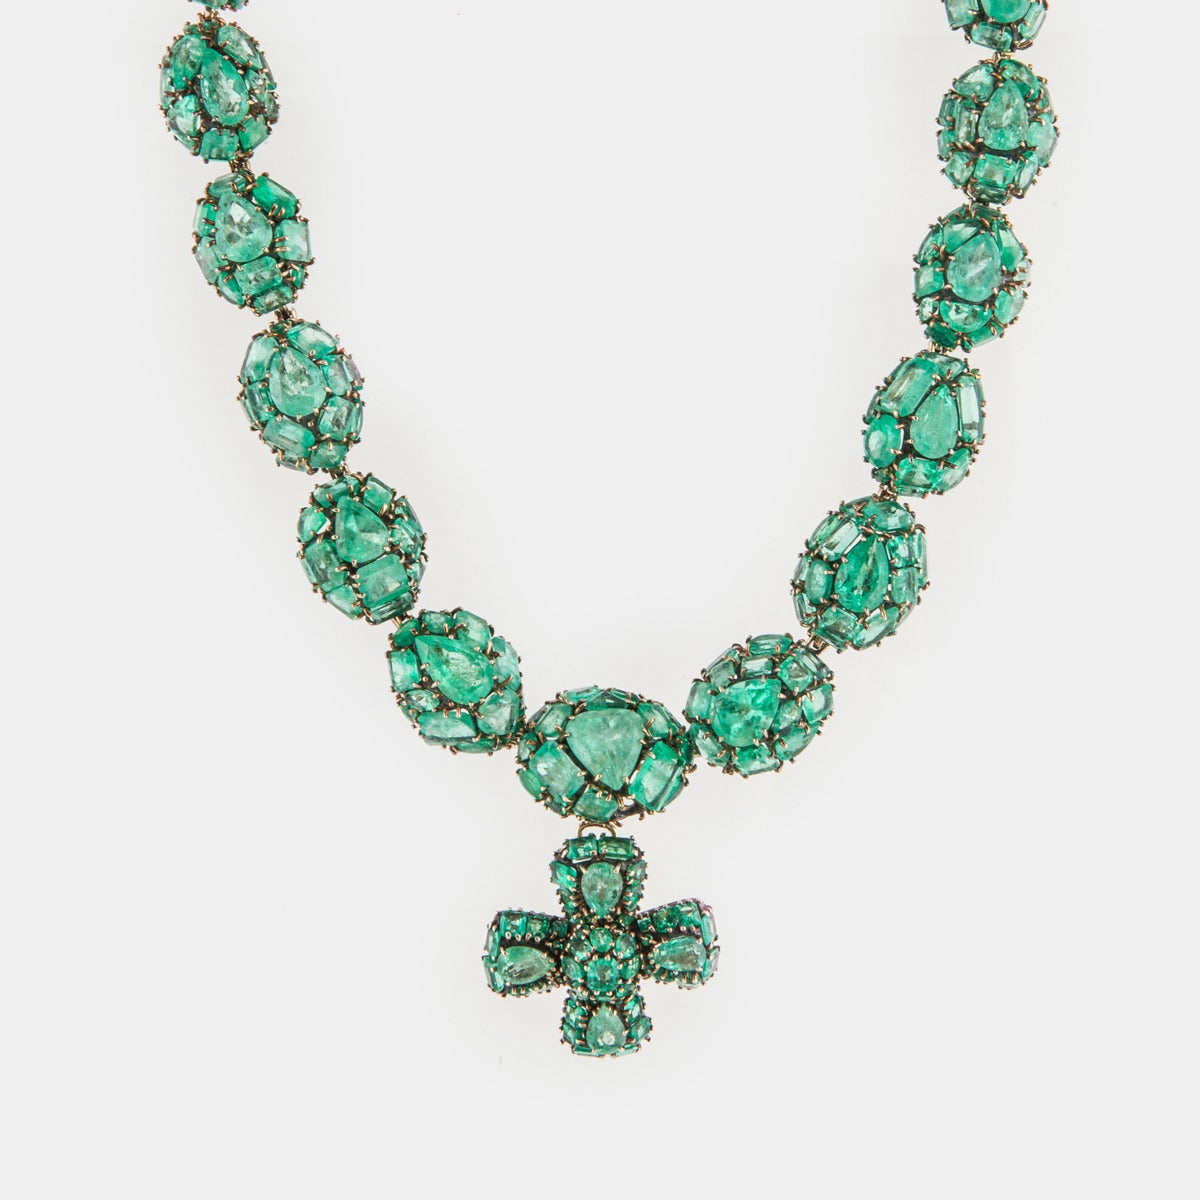 Versatile jewelry suite by Marilyn Cooperman that includes a necklace, earrings and removable pendant that may also be worn as a brooch.  The necklace features domes of different sized and shaped emeralds with a detachable Maltese cross pendant/pin.